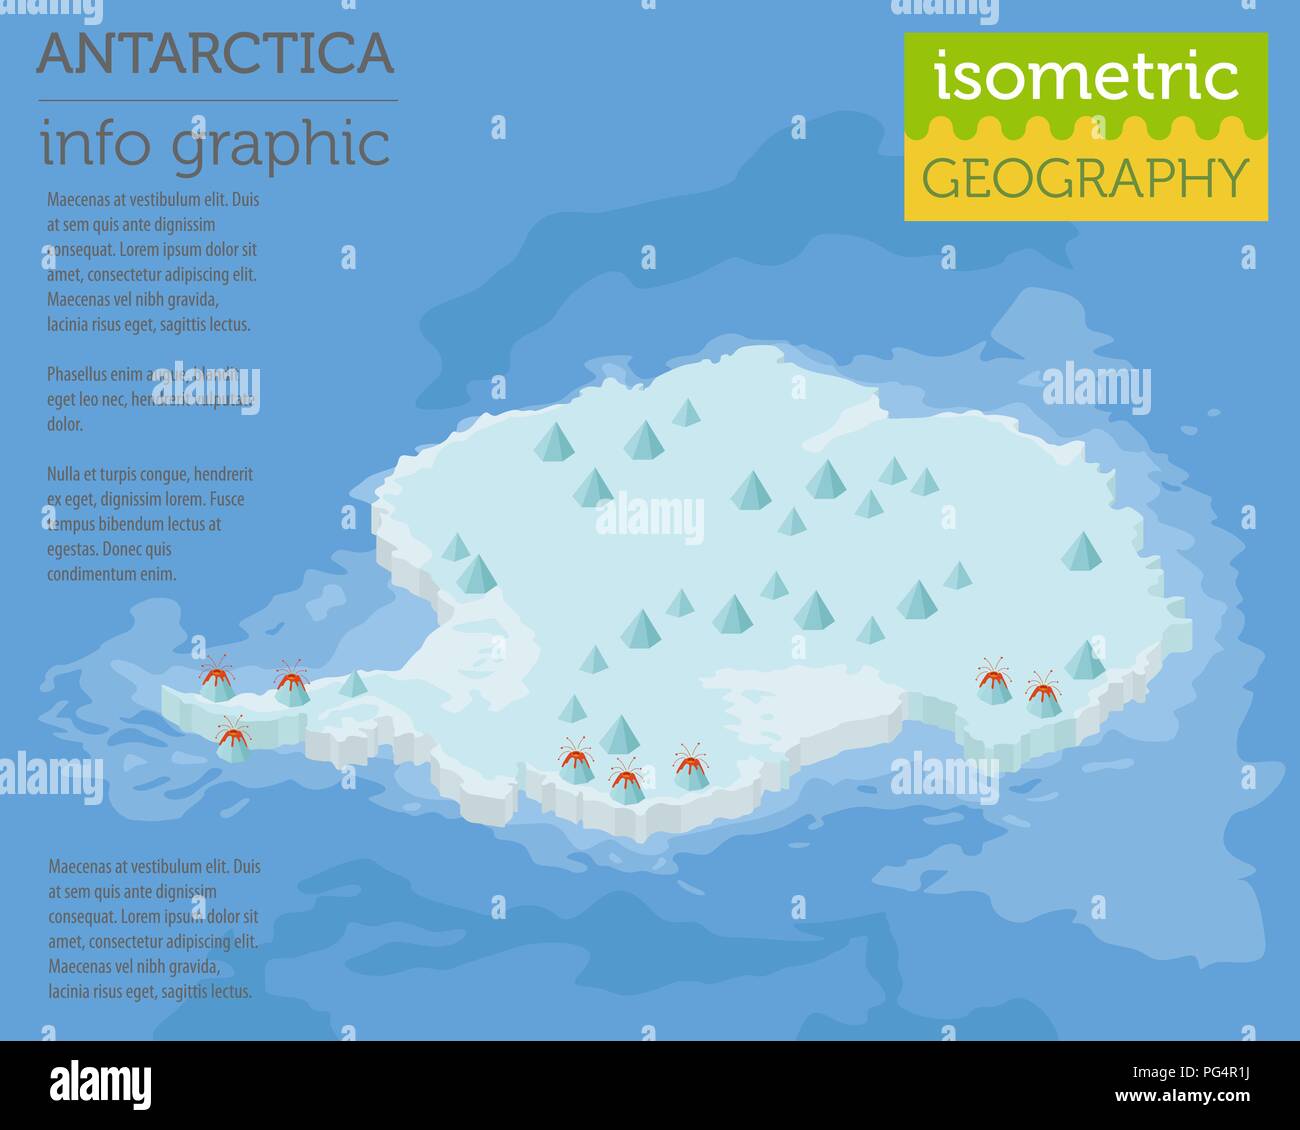 Isometric 3d Antarctica physical map elements. Build your own geography info graphic collection. Vector illustration Stock Vector